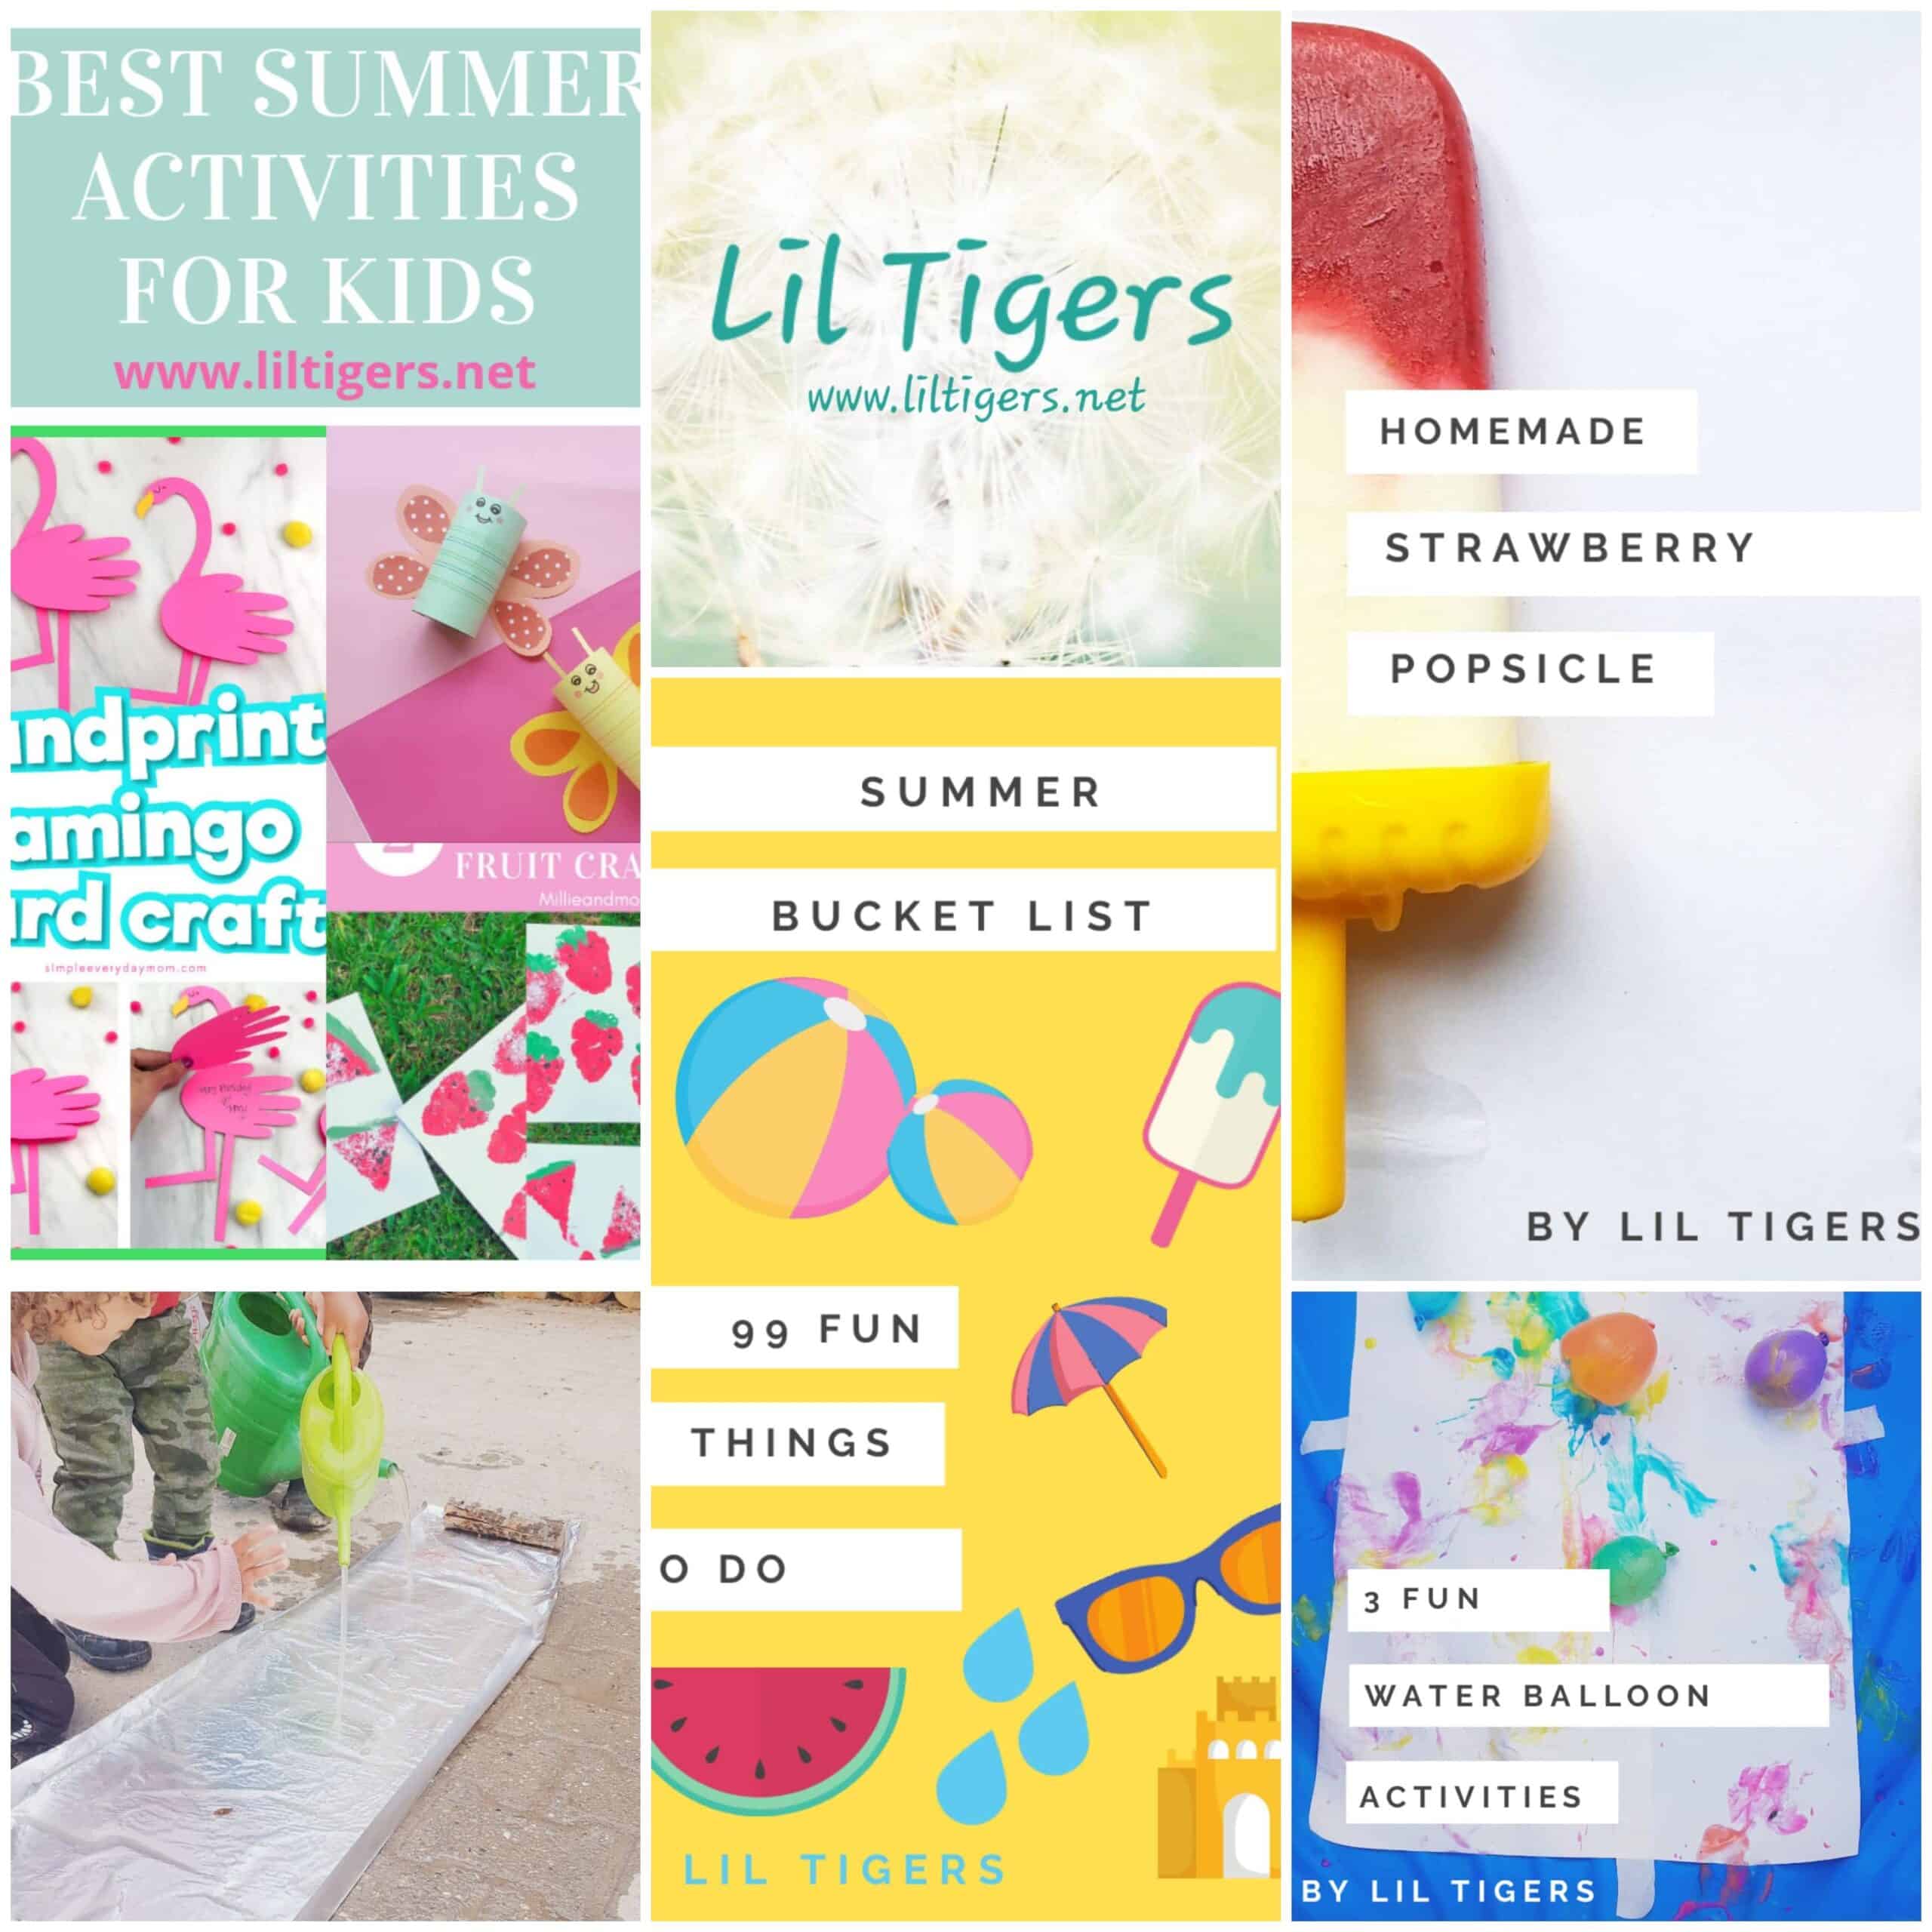 10+ Fun Summer Activities for Lil Tigers